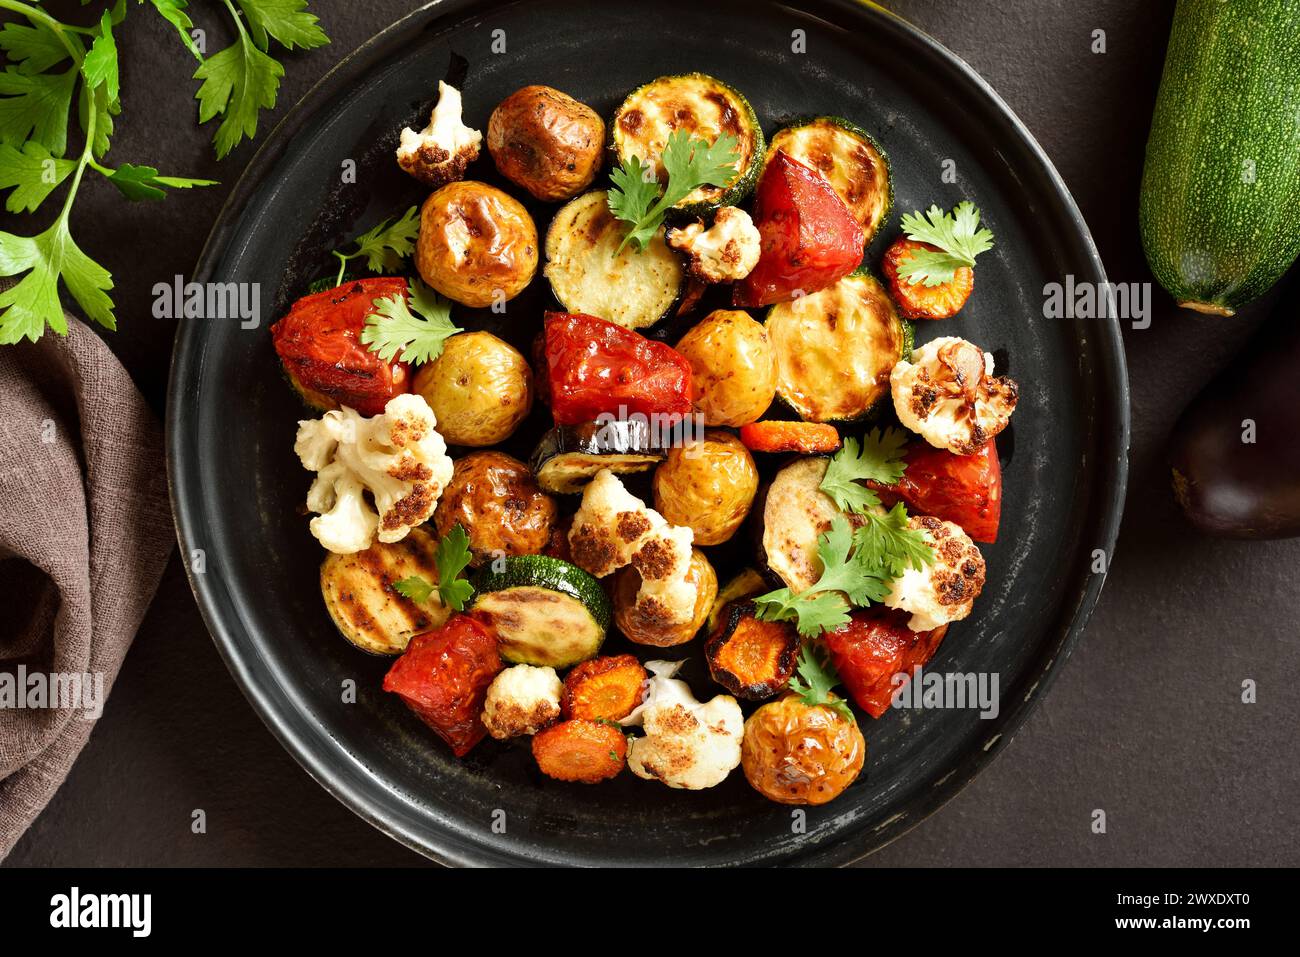 Roasted vegetables on plate over dark background. Top view, flat lay Stock Photo